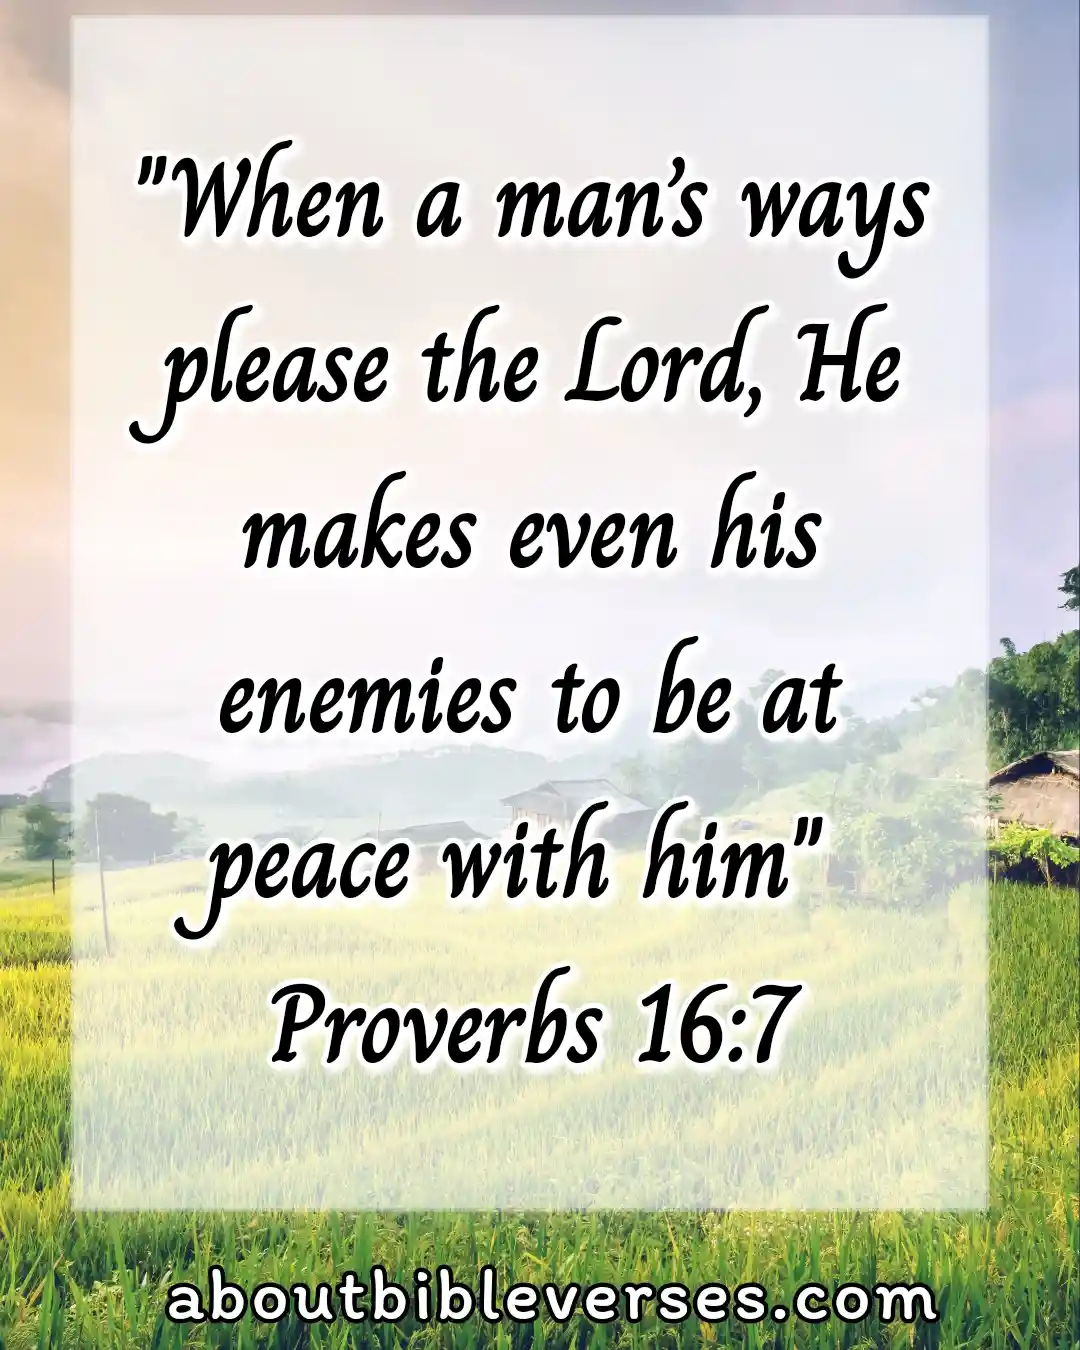 Bible Verses About Destroying Enemies (Proverbs 16:7)